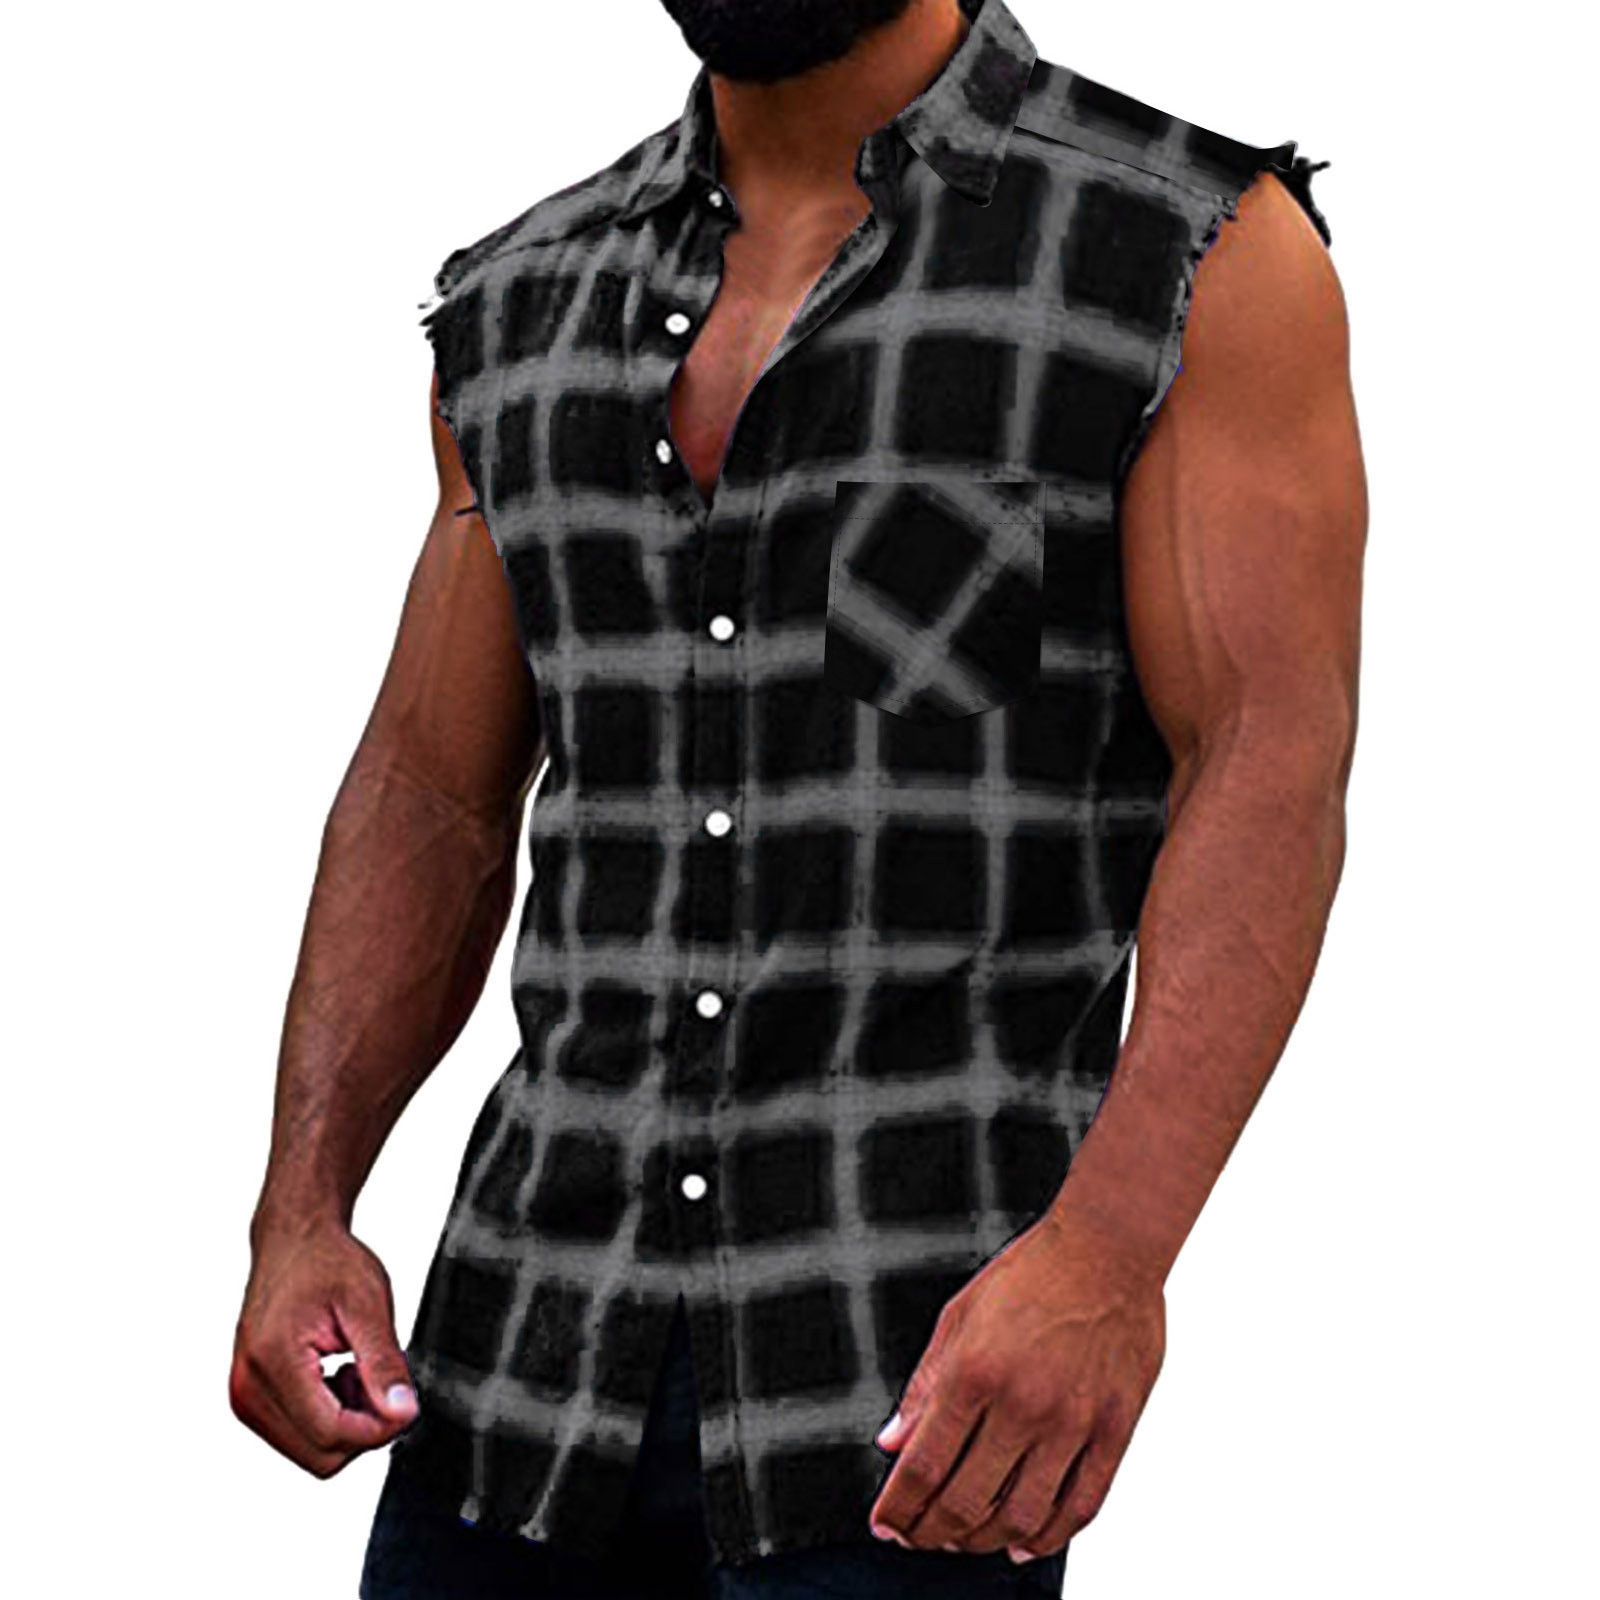 WUWUQF Men's Sleeveless Shirts Summer T-Shirt Vest with Old Cuffs and ...